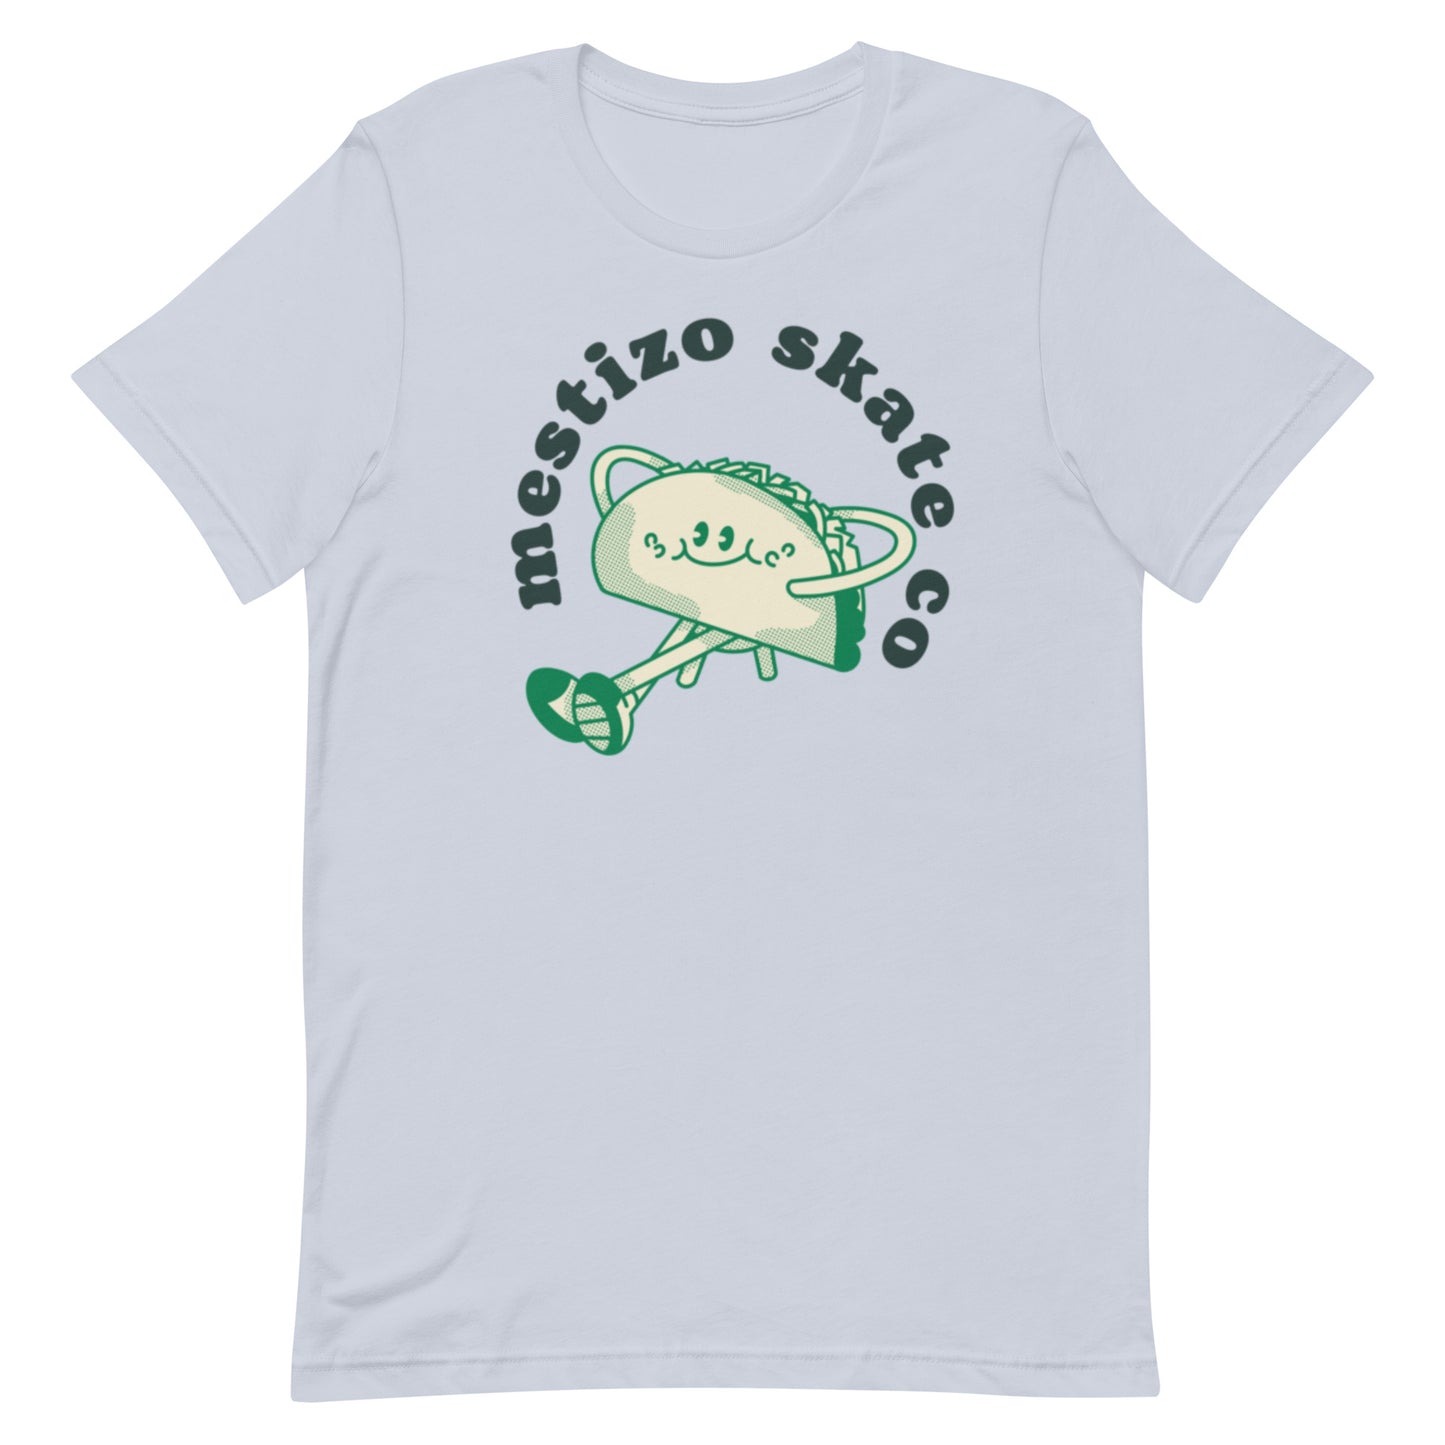 City Skate Project Taco Tuesday Unisex t-shirt